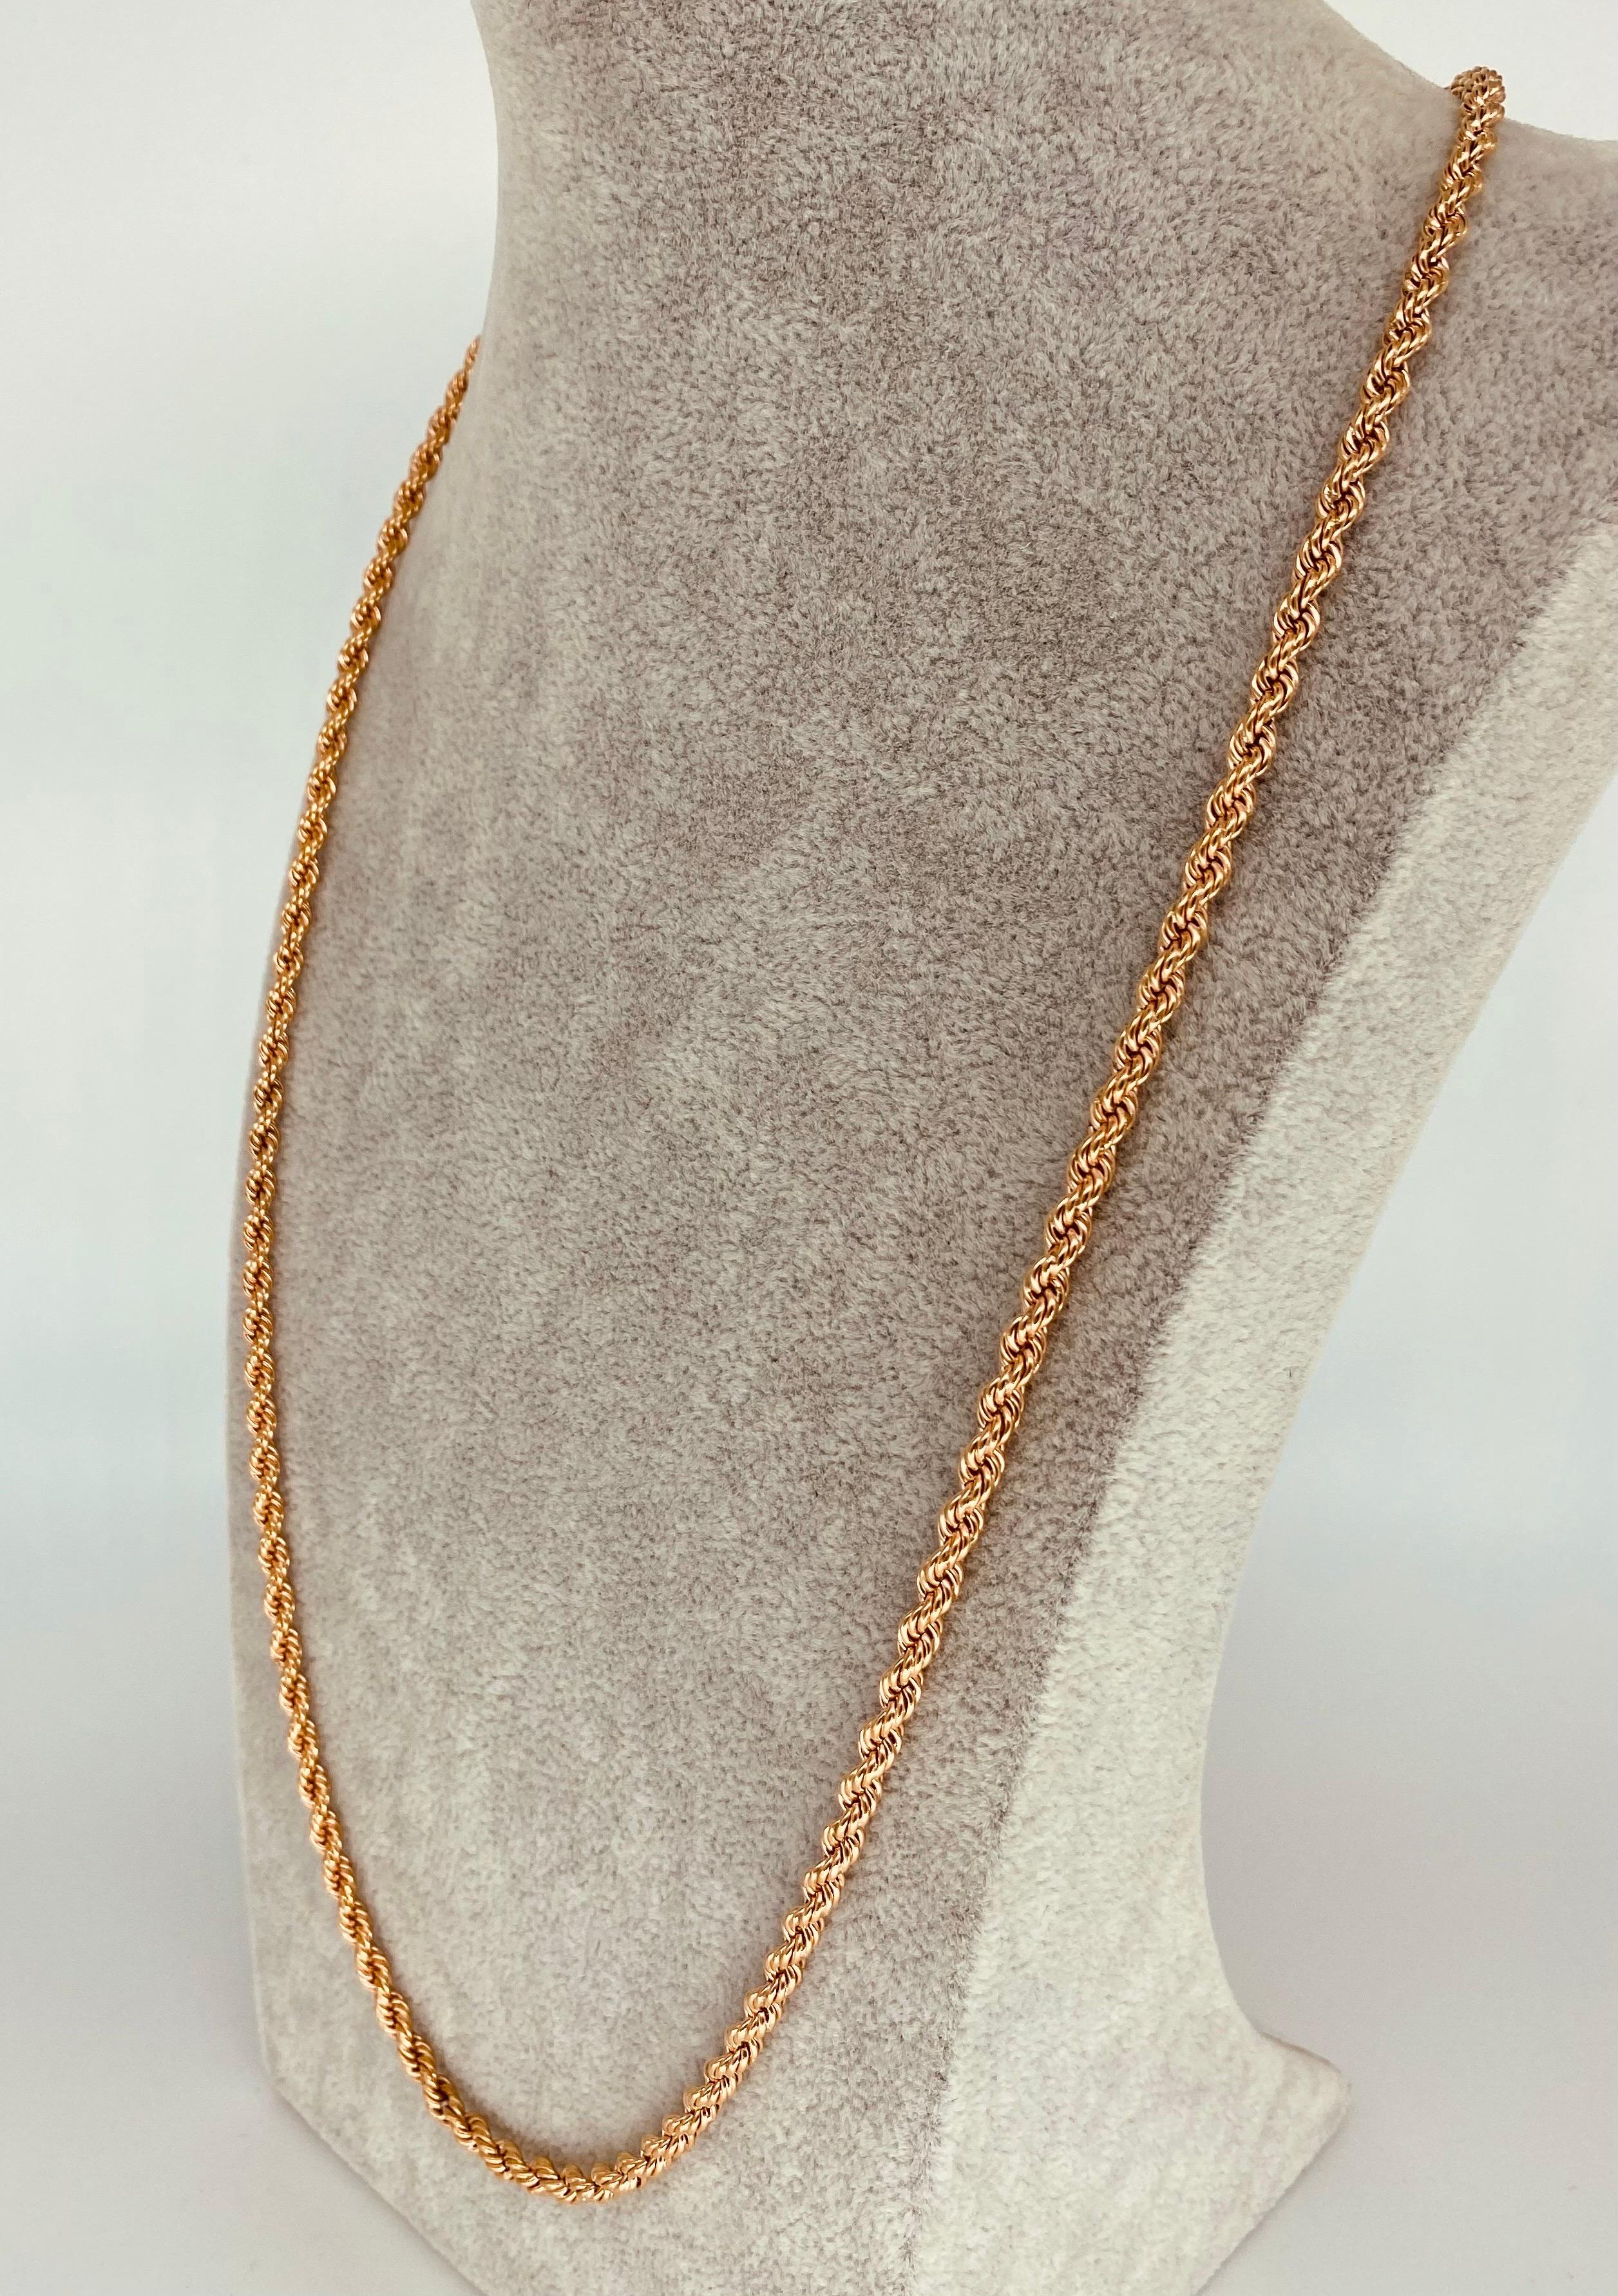 Vintage 4.10mm 18k Rose Gold Rope Chain 28 Inch. Very rare security lock on this vintage 18k solid rose gold chain. The chain is 4.10 wide and is 28 inches long. The chain is stamped 750 for purity (18k).